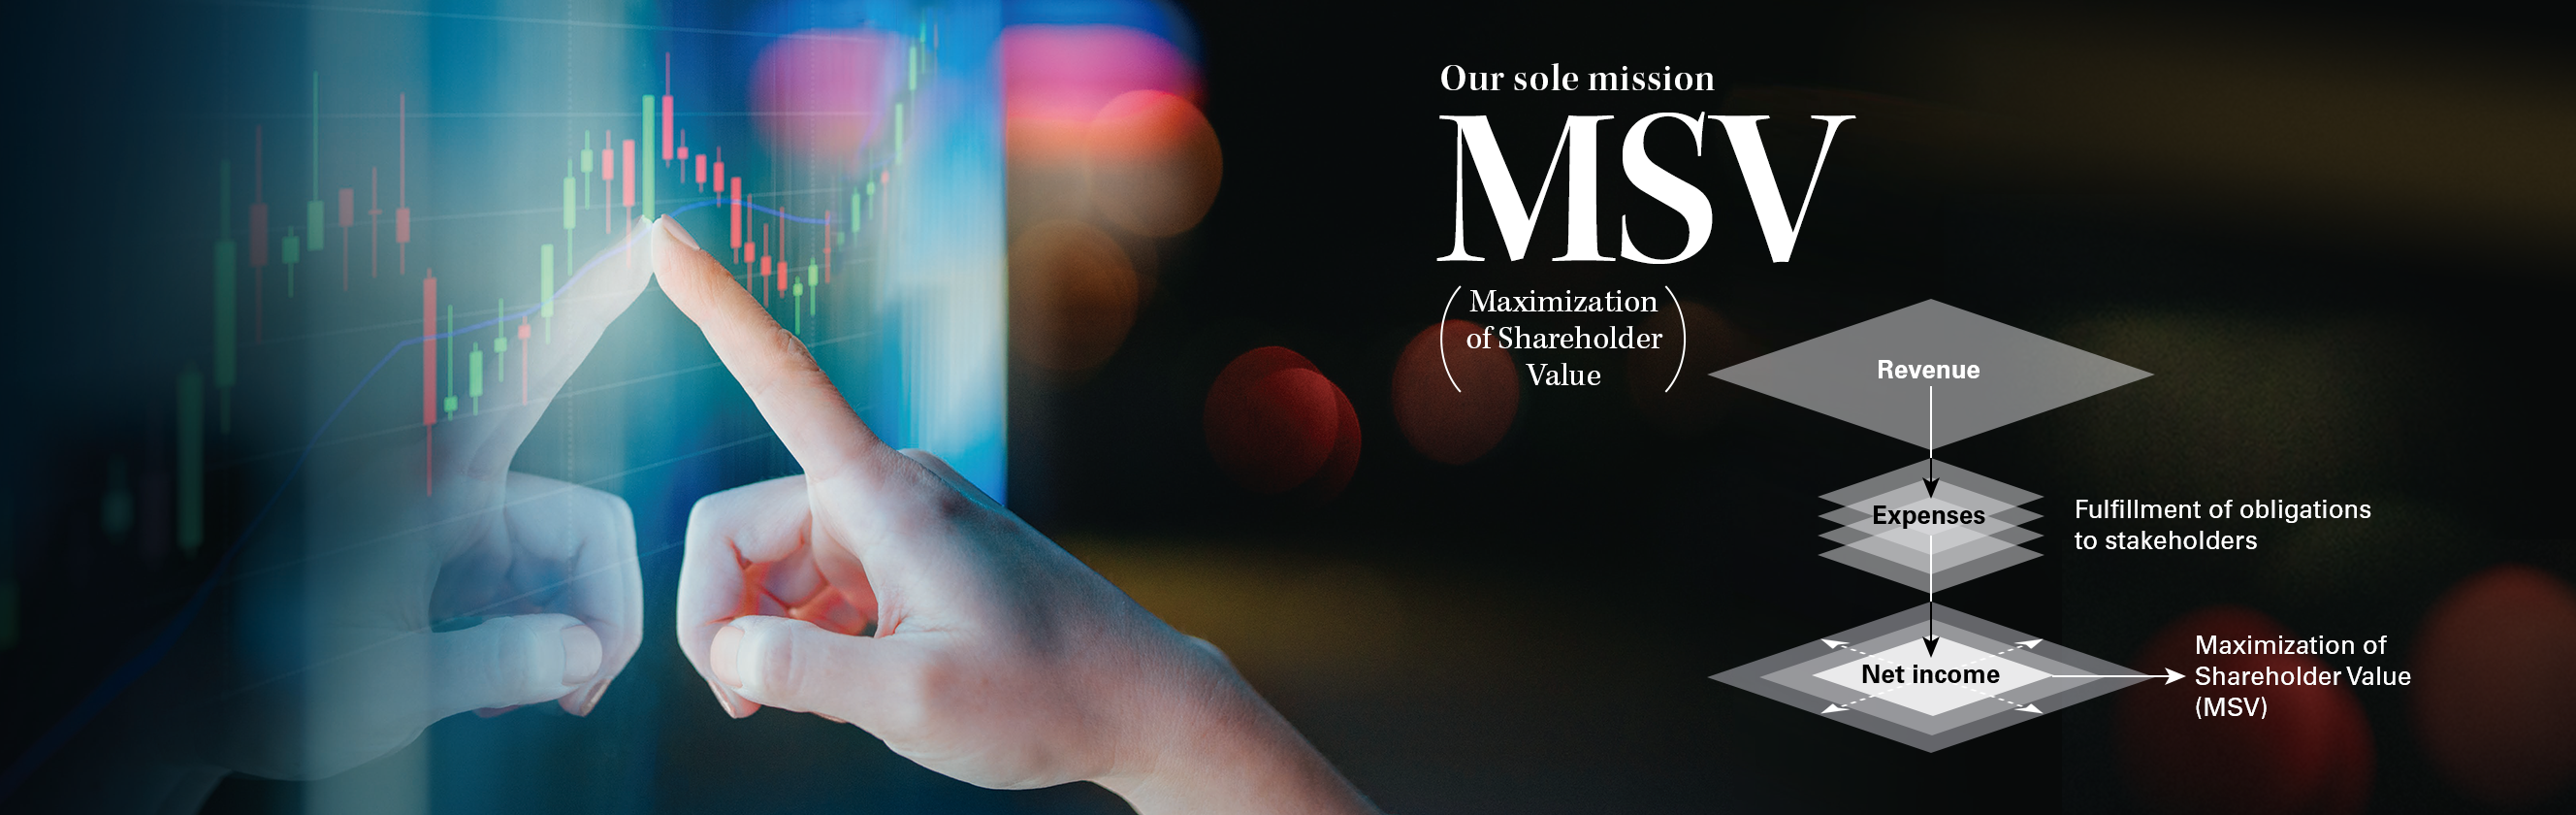 Our sole mission MSV (Maximization of Shareholder Value)